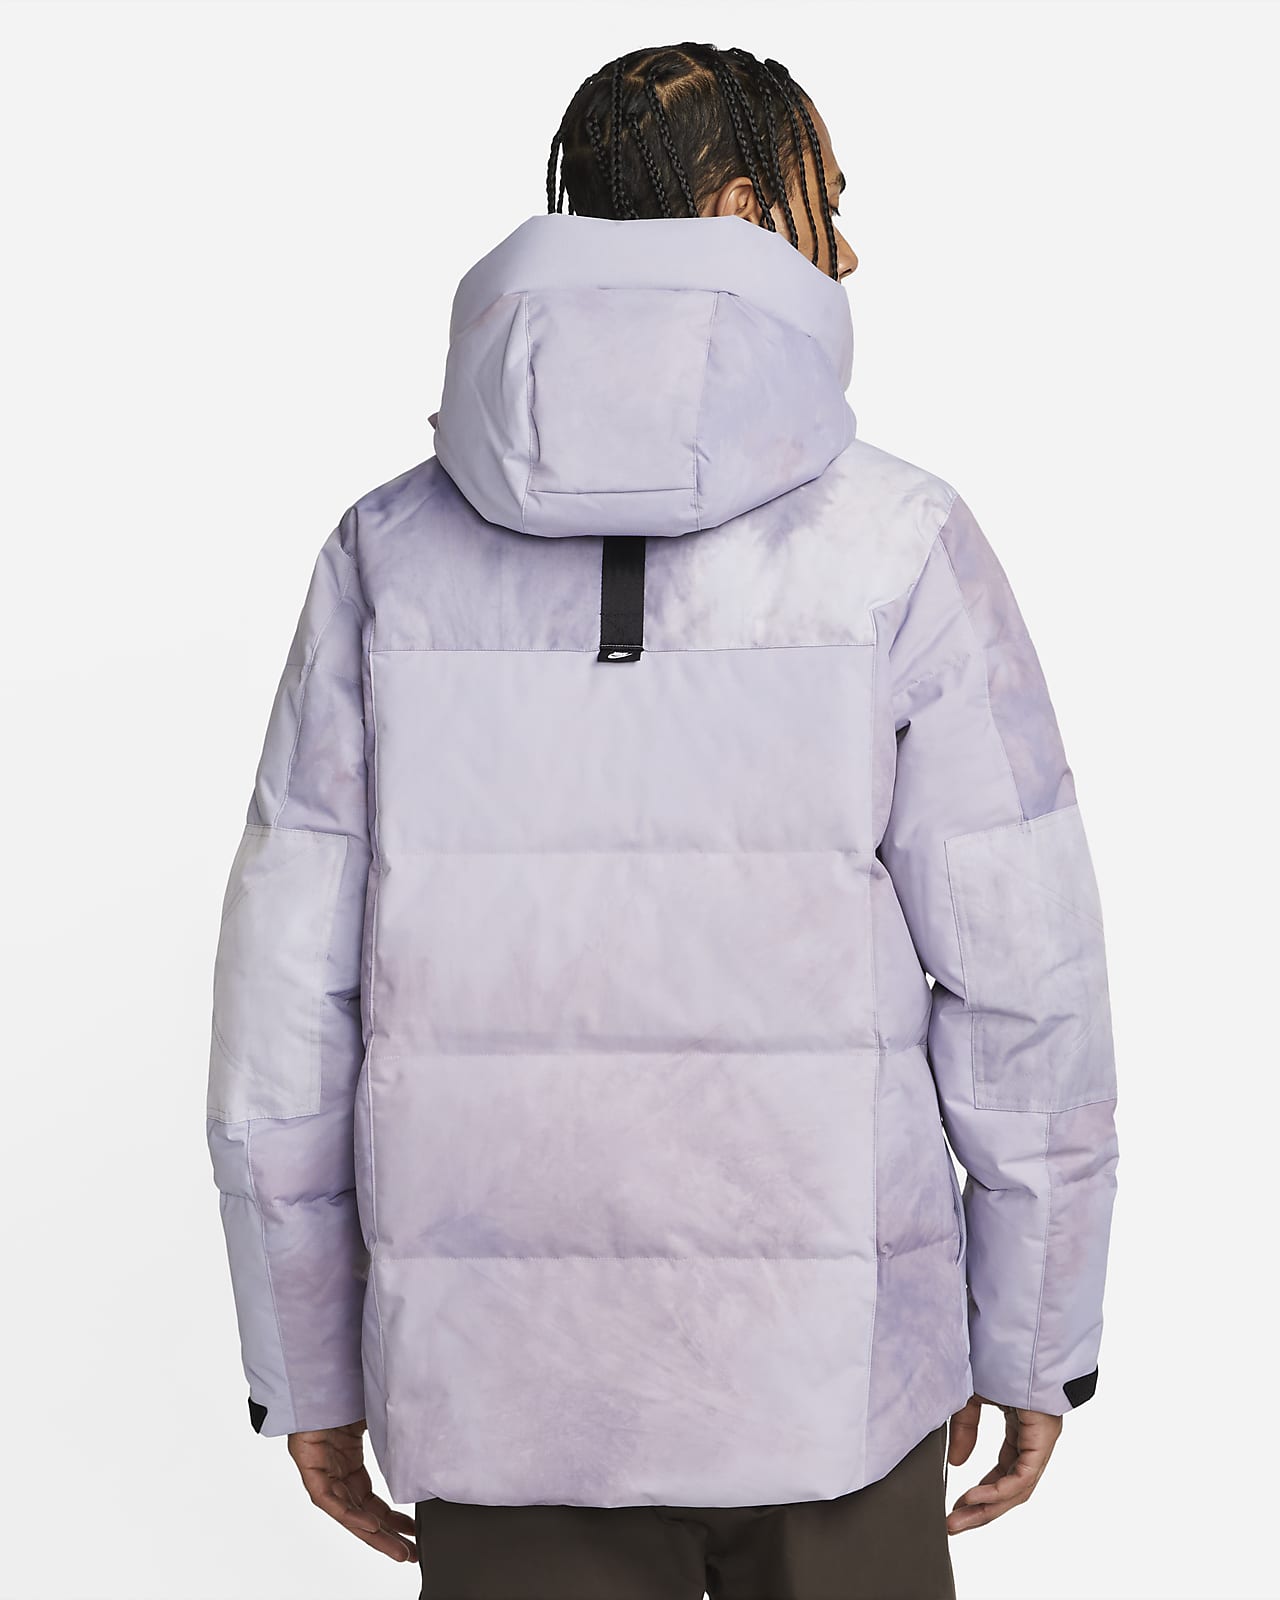 Pegashoes - Parka Nike Nsw Storm-Fit Windrunner